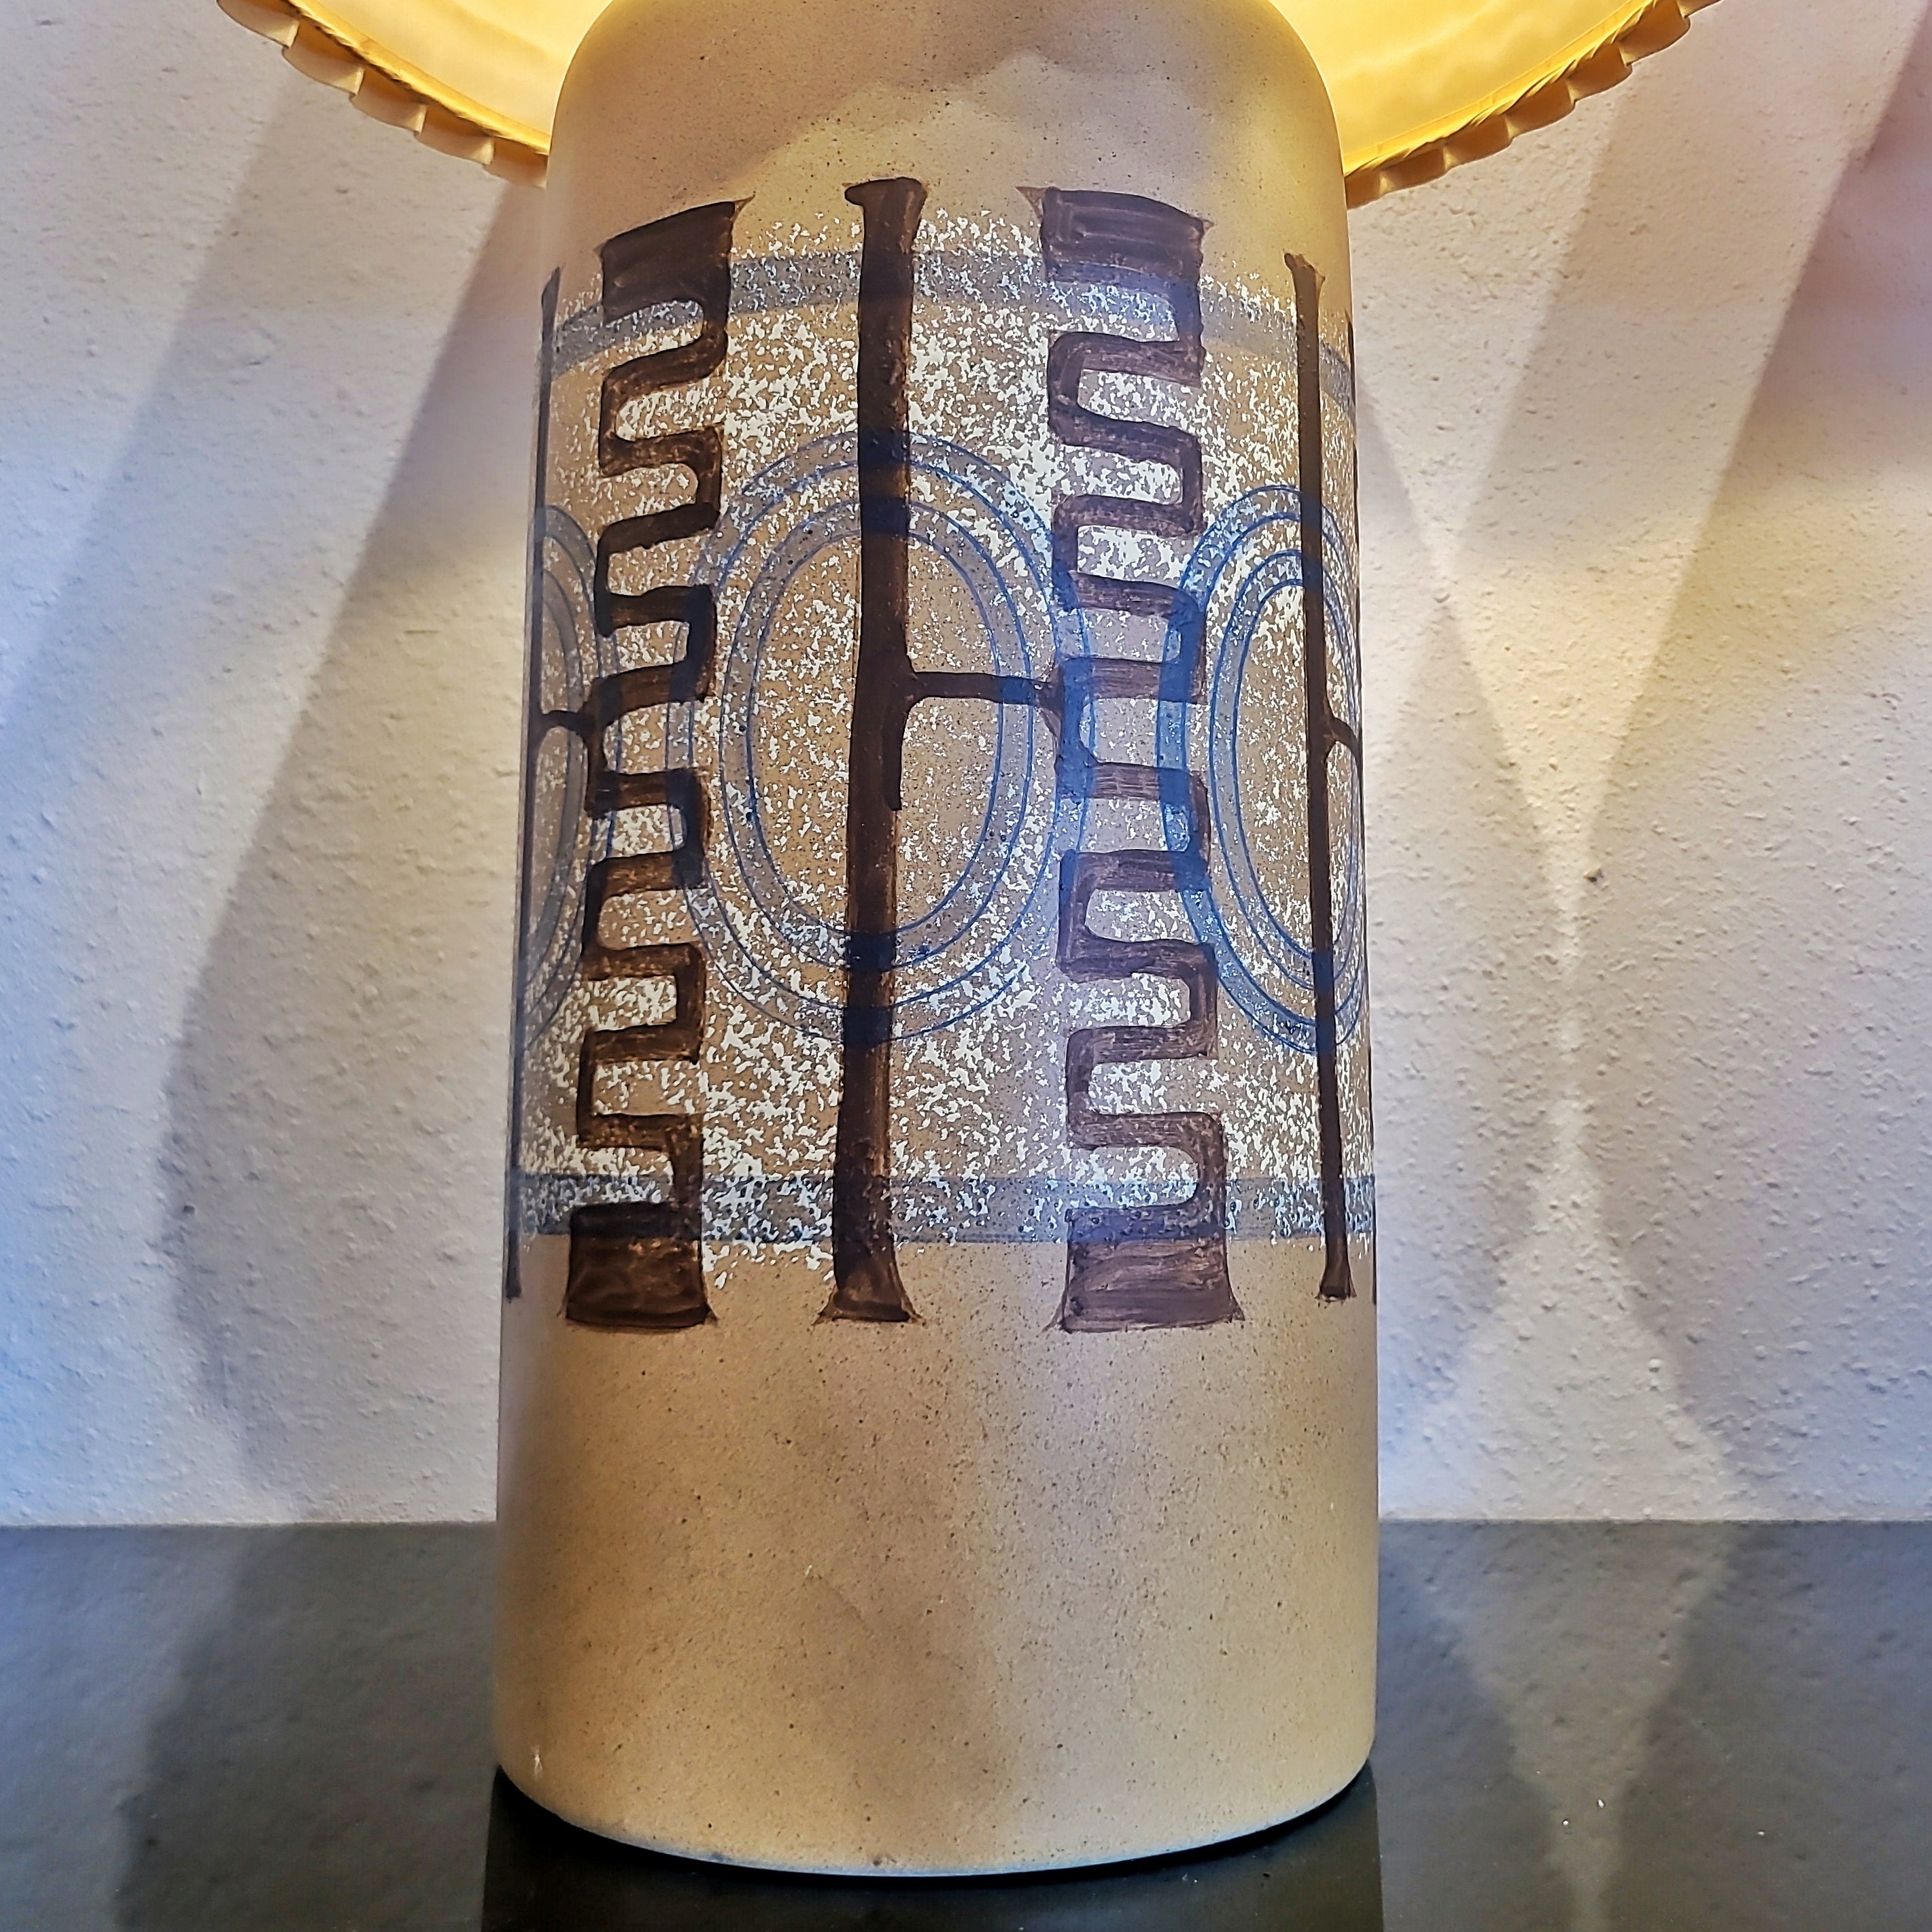 ELSPETH COHEN TABLE LAMPS FOR LAPID POTTERY, ISRAEL (PAIR)